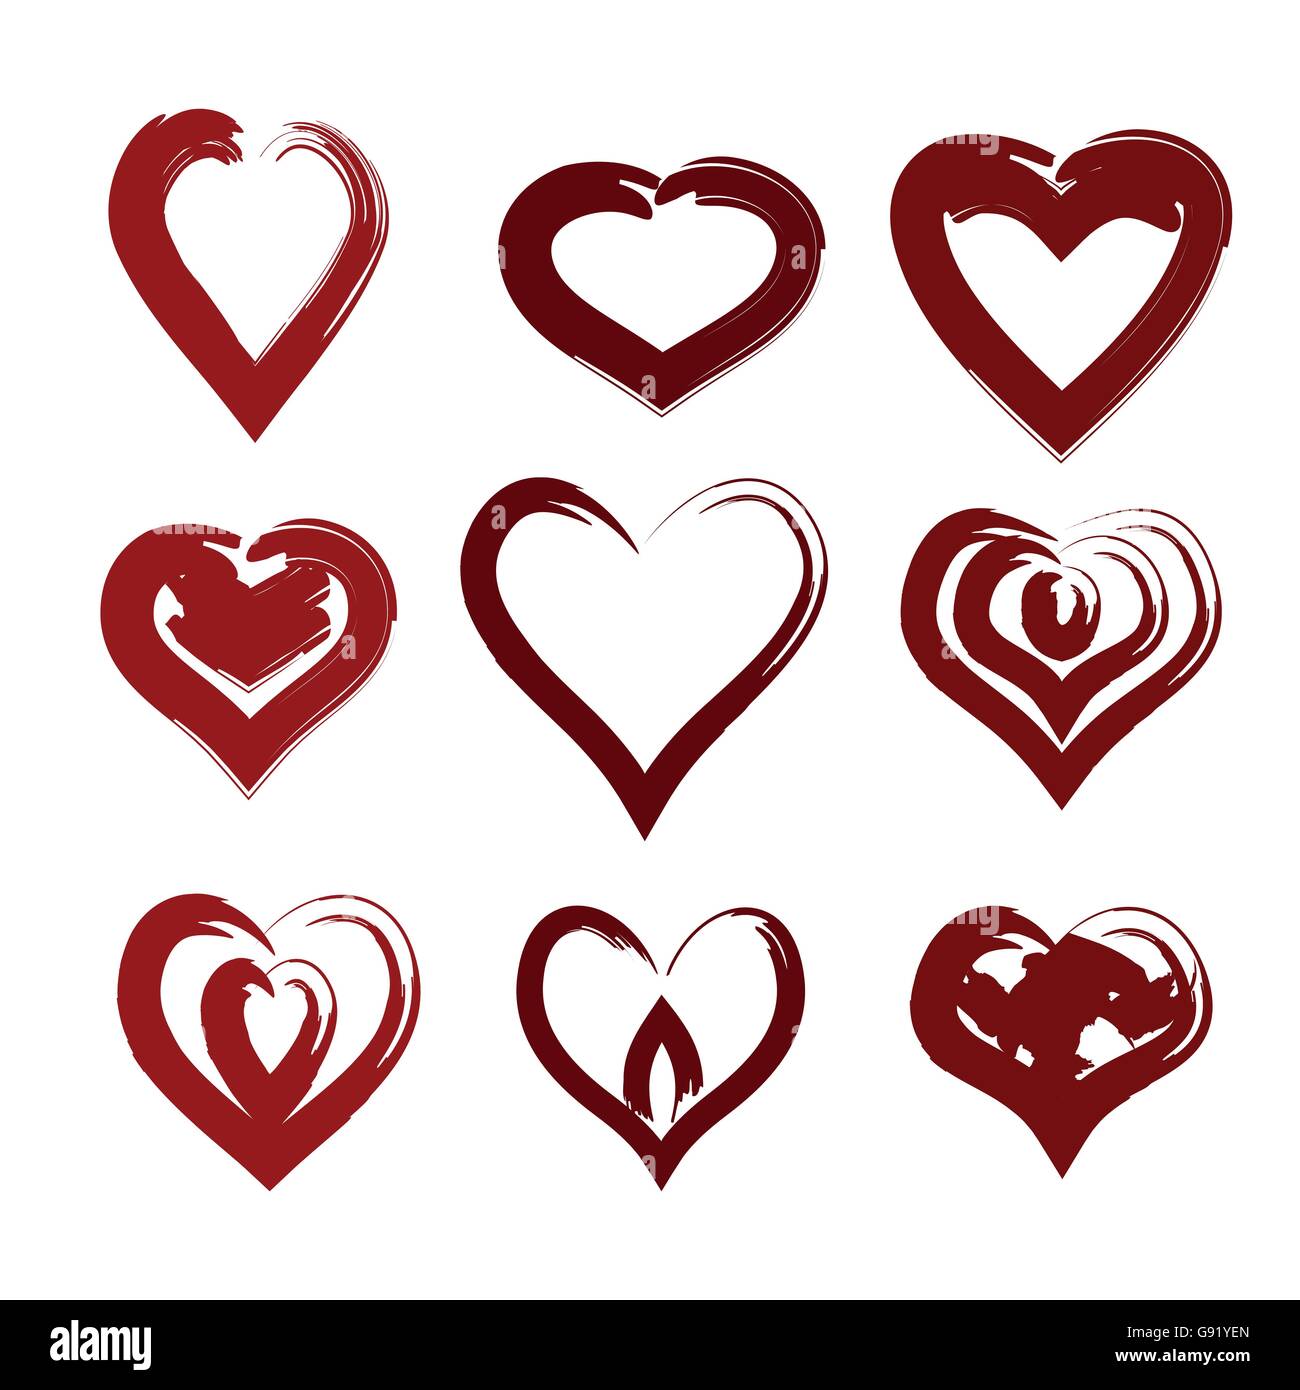 creative design abstract painted heart symbol vector set Stock Vector